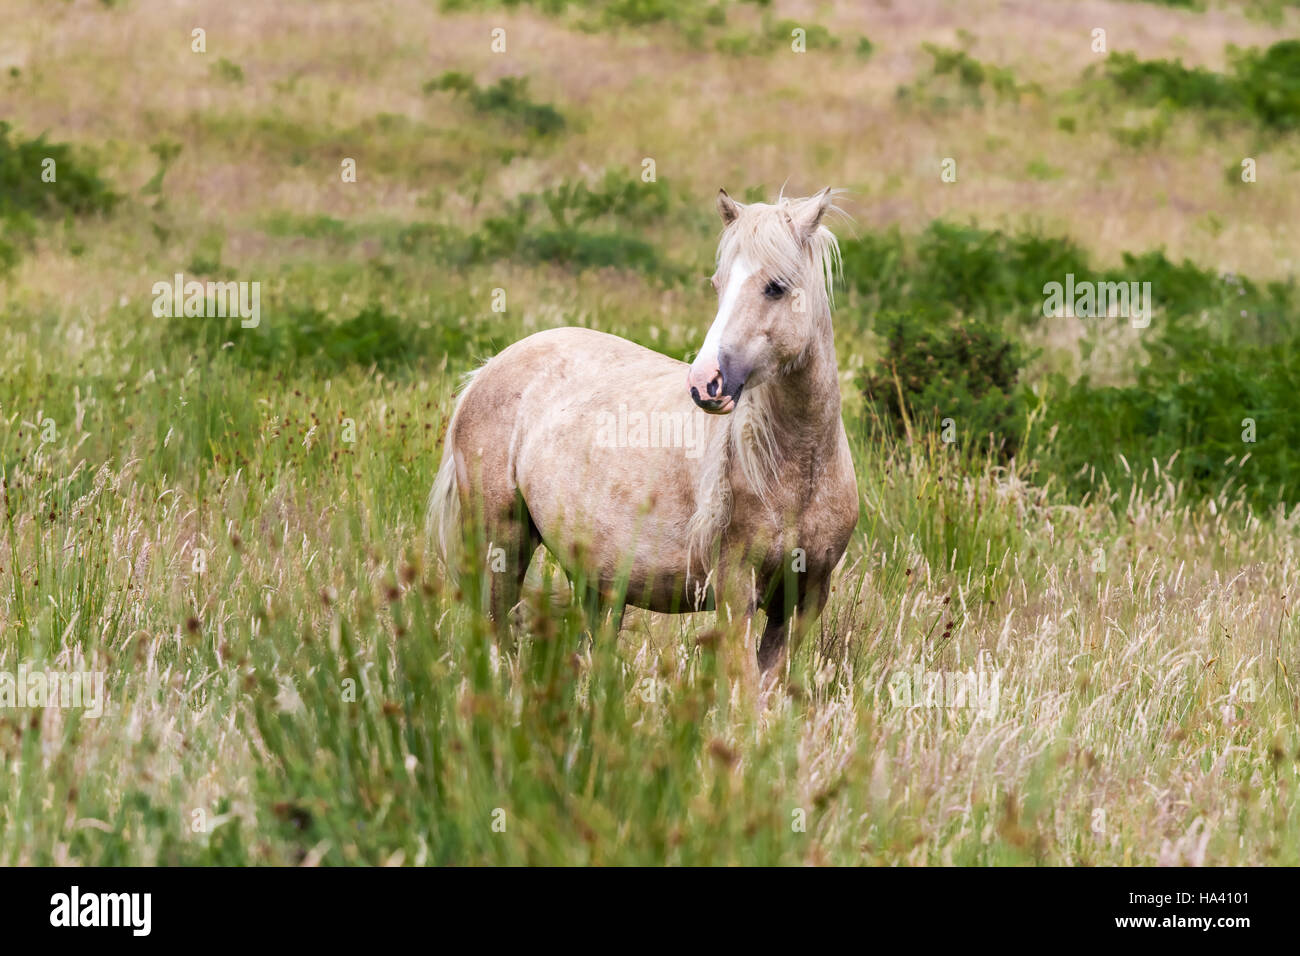 Horse on the pasture peering at the photographer Stock Photo